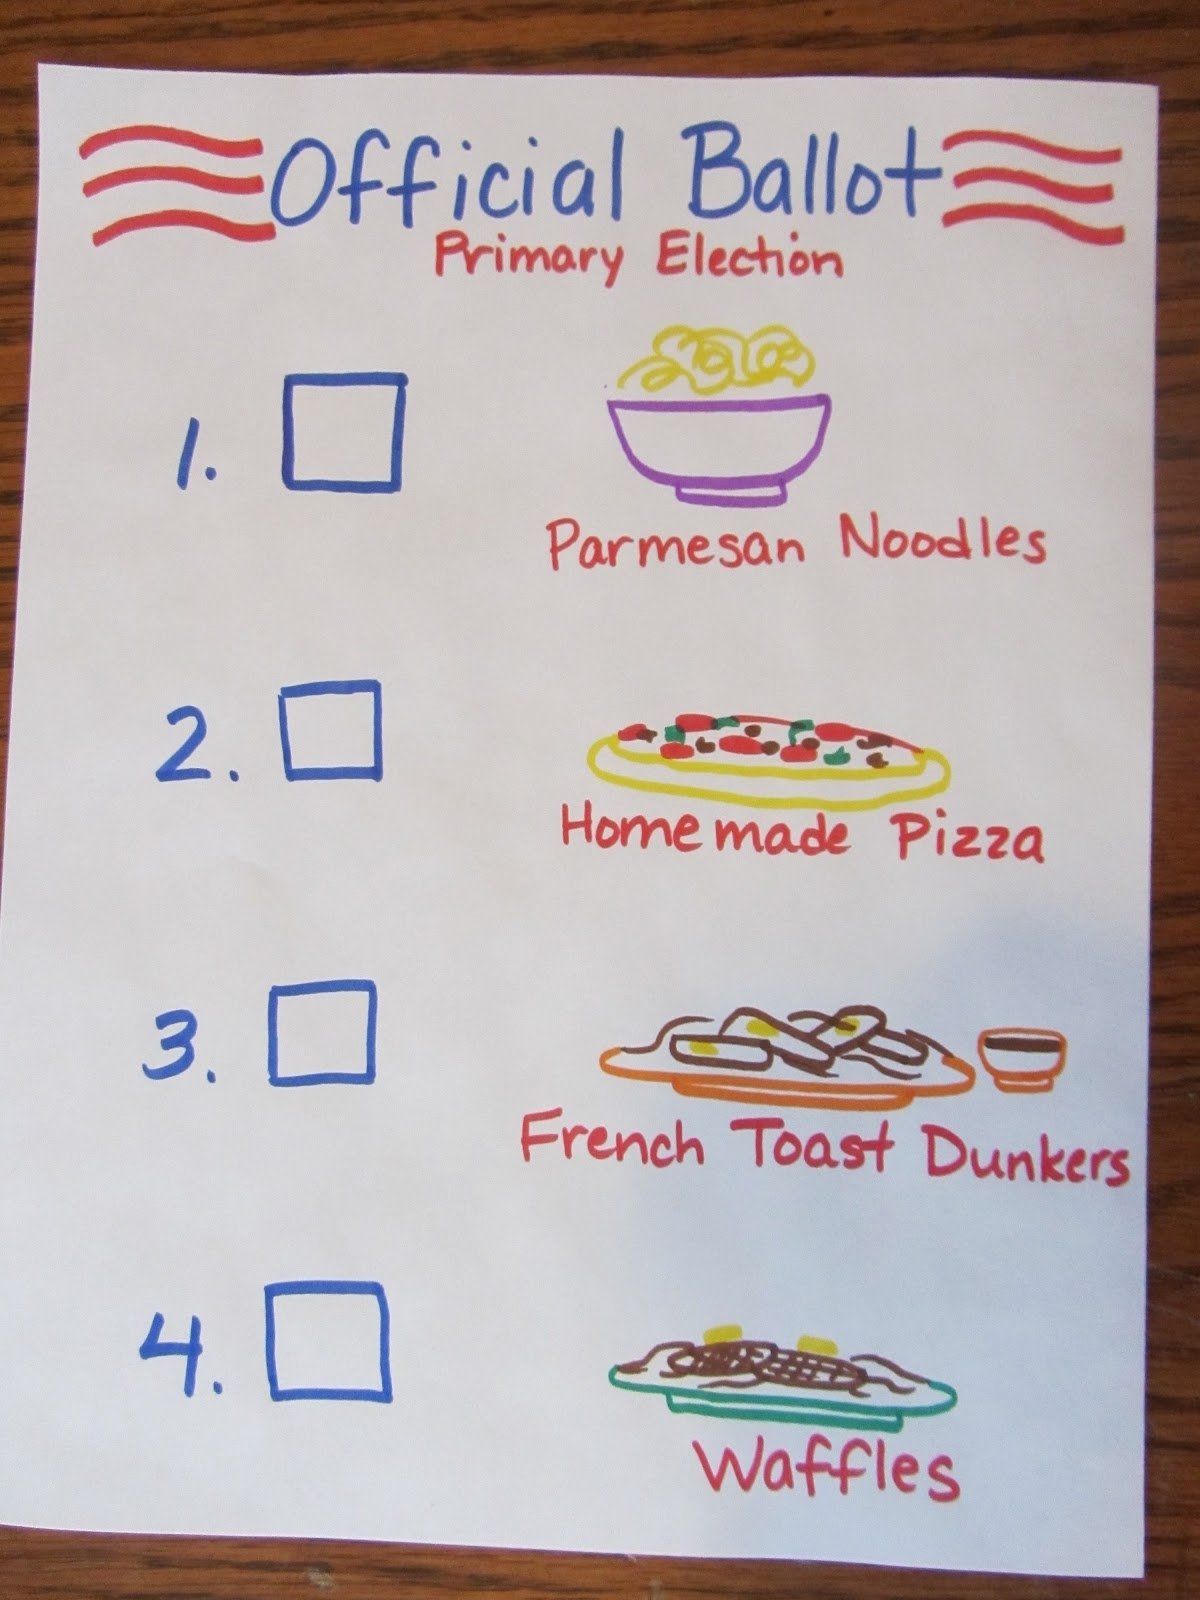 10 Spectacular Campaign Poster Ideas For Kids the unlikely homeschool teaching kids about the election process 2022